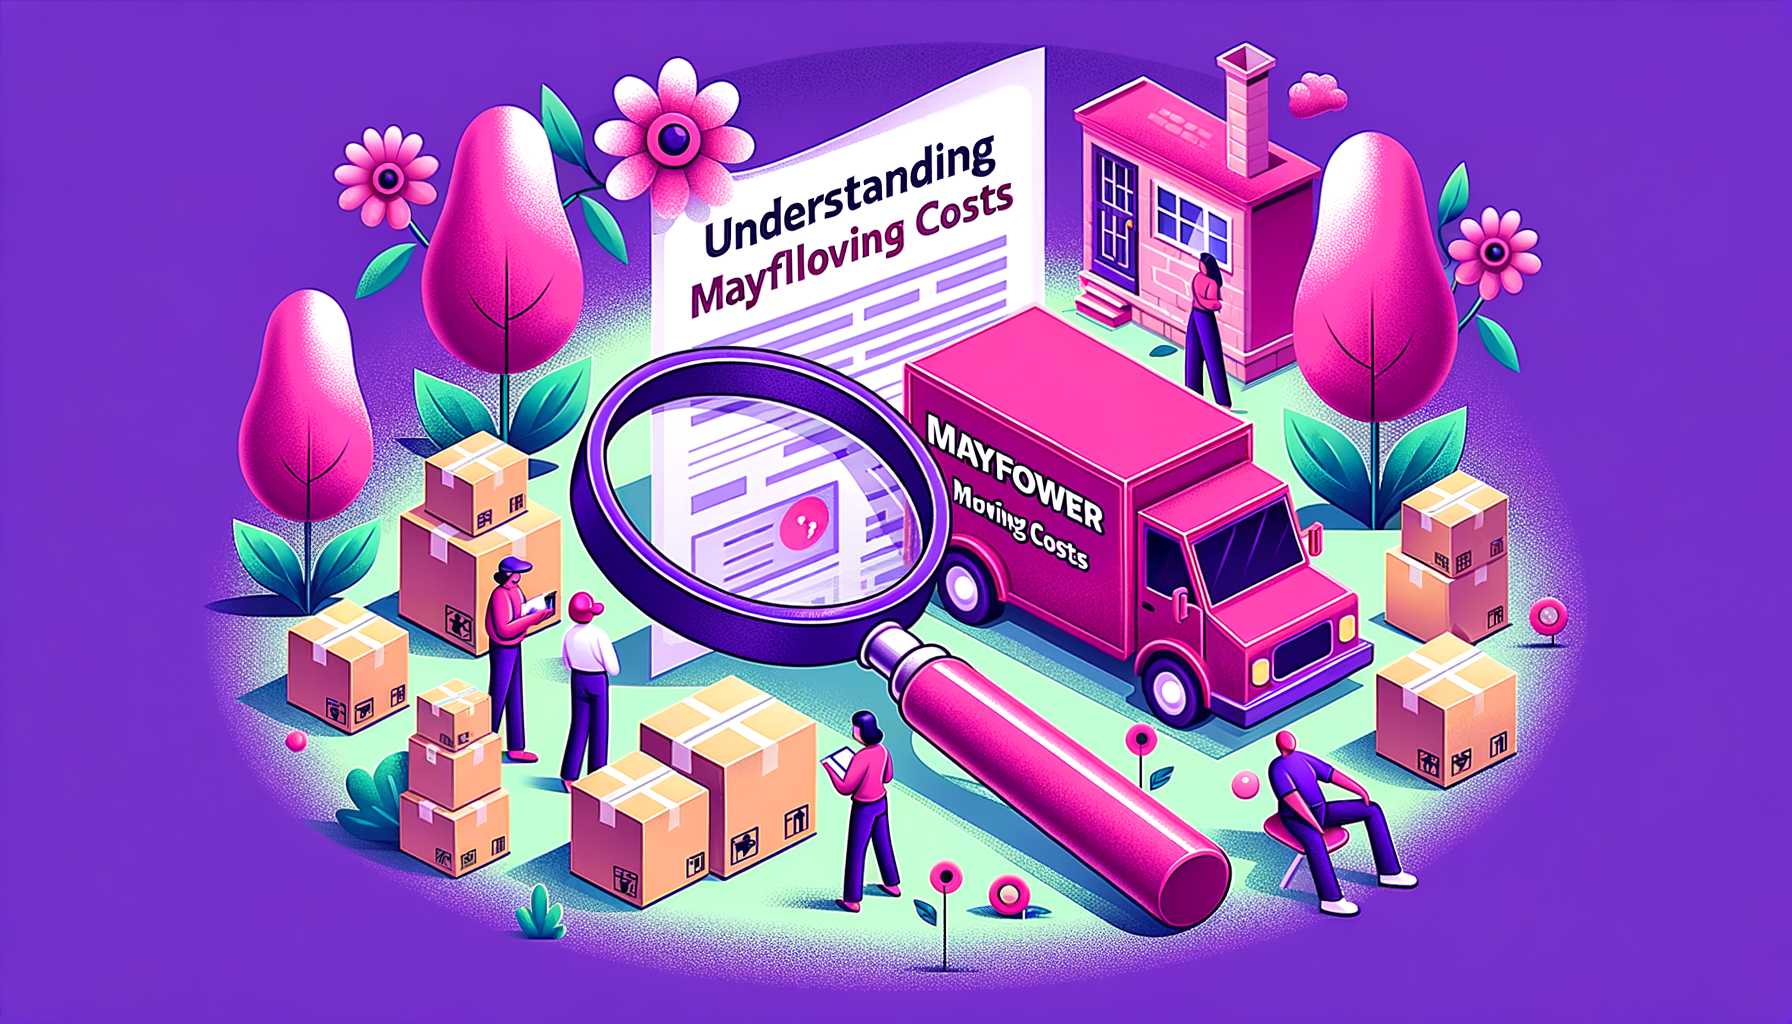 Cartoon illustration highlighting fuschia-colored elements to represent understanding Mayflower moving costs, featuring a moving truck and financial symbols.